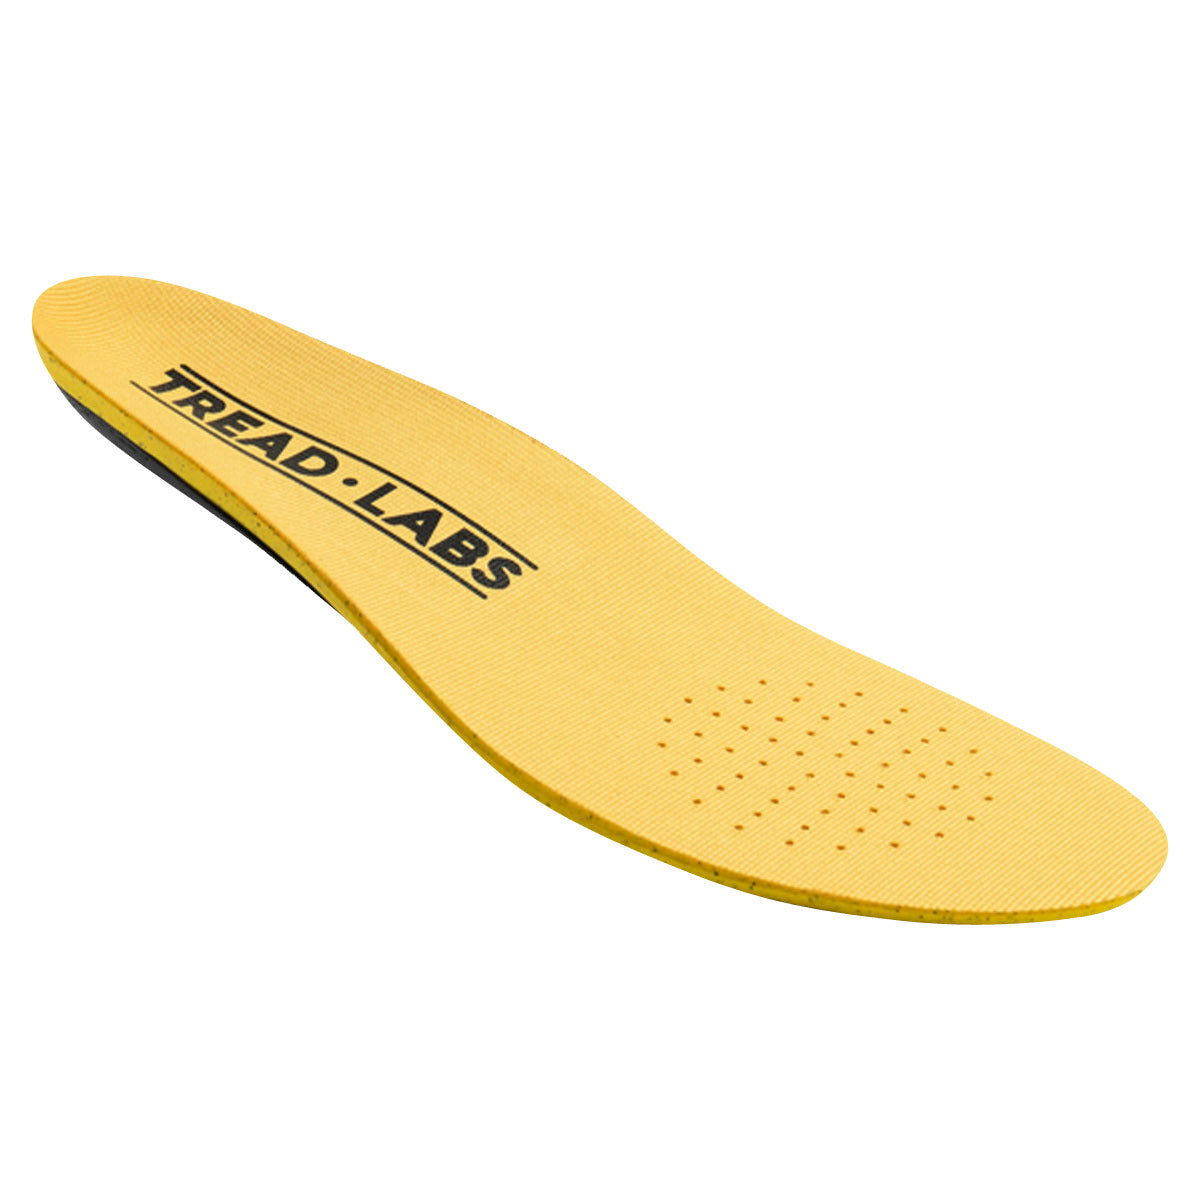 Tread Labs Dash Insoles in  by GOHUNT | Tread Labs - GOHUNT Shop